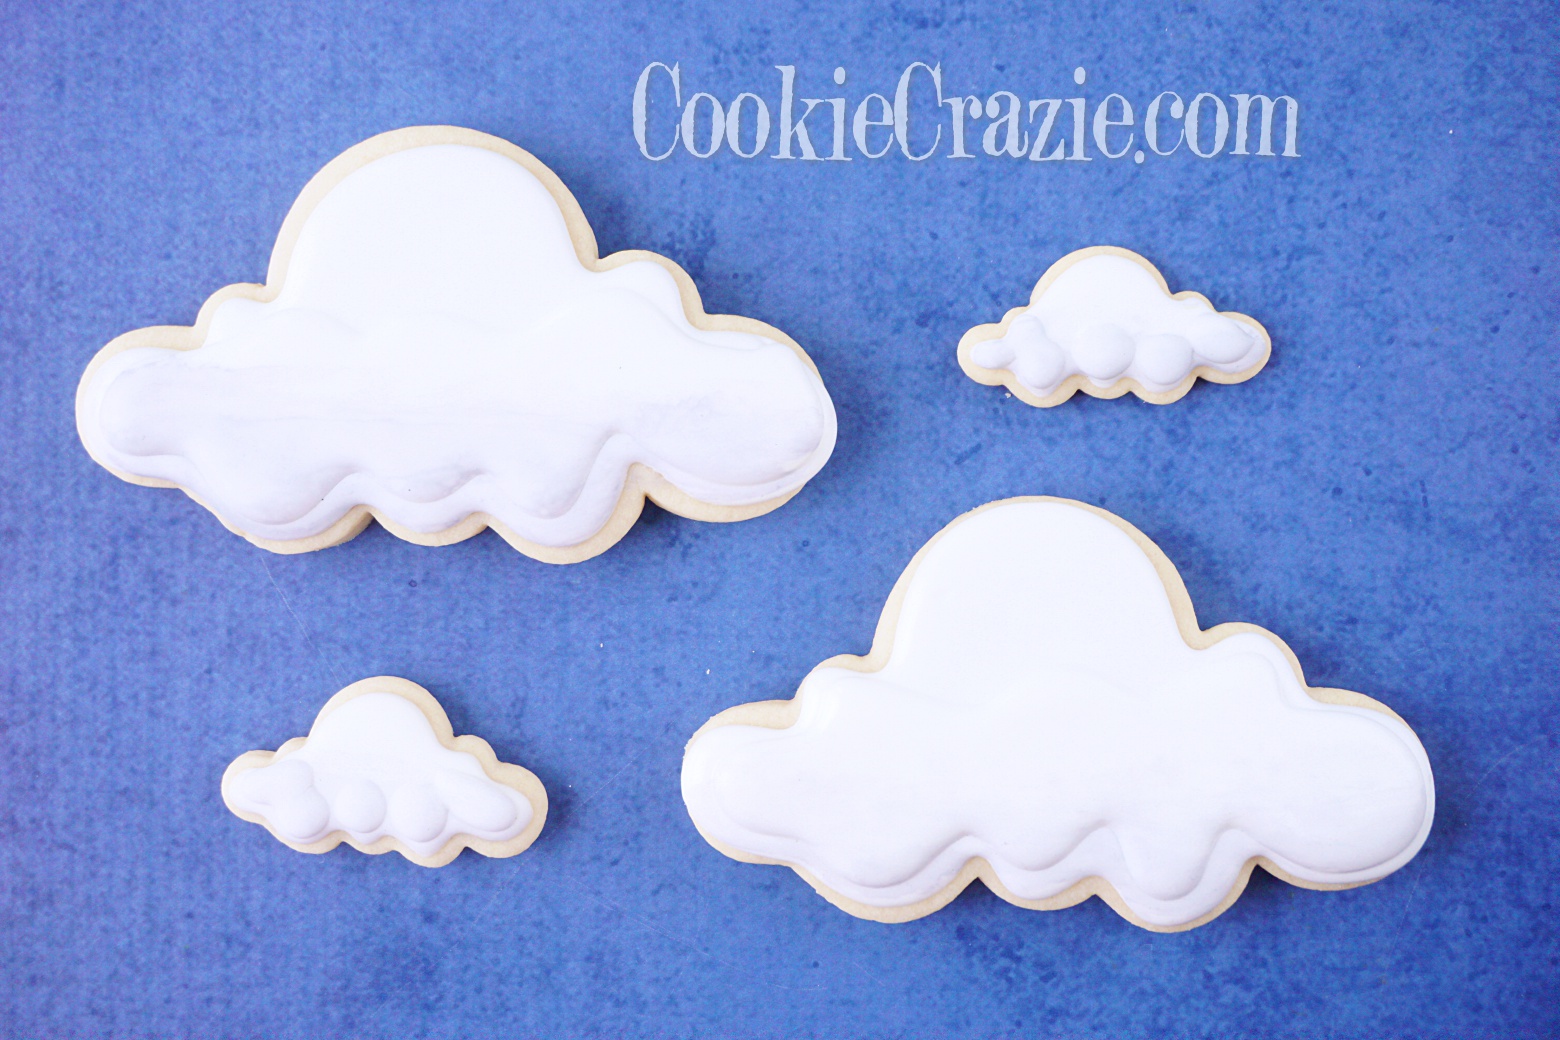  Cloud Decorated Sugar Cookies YouTube video  HERE  